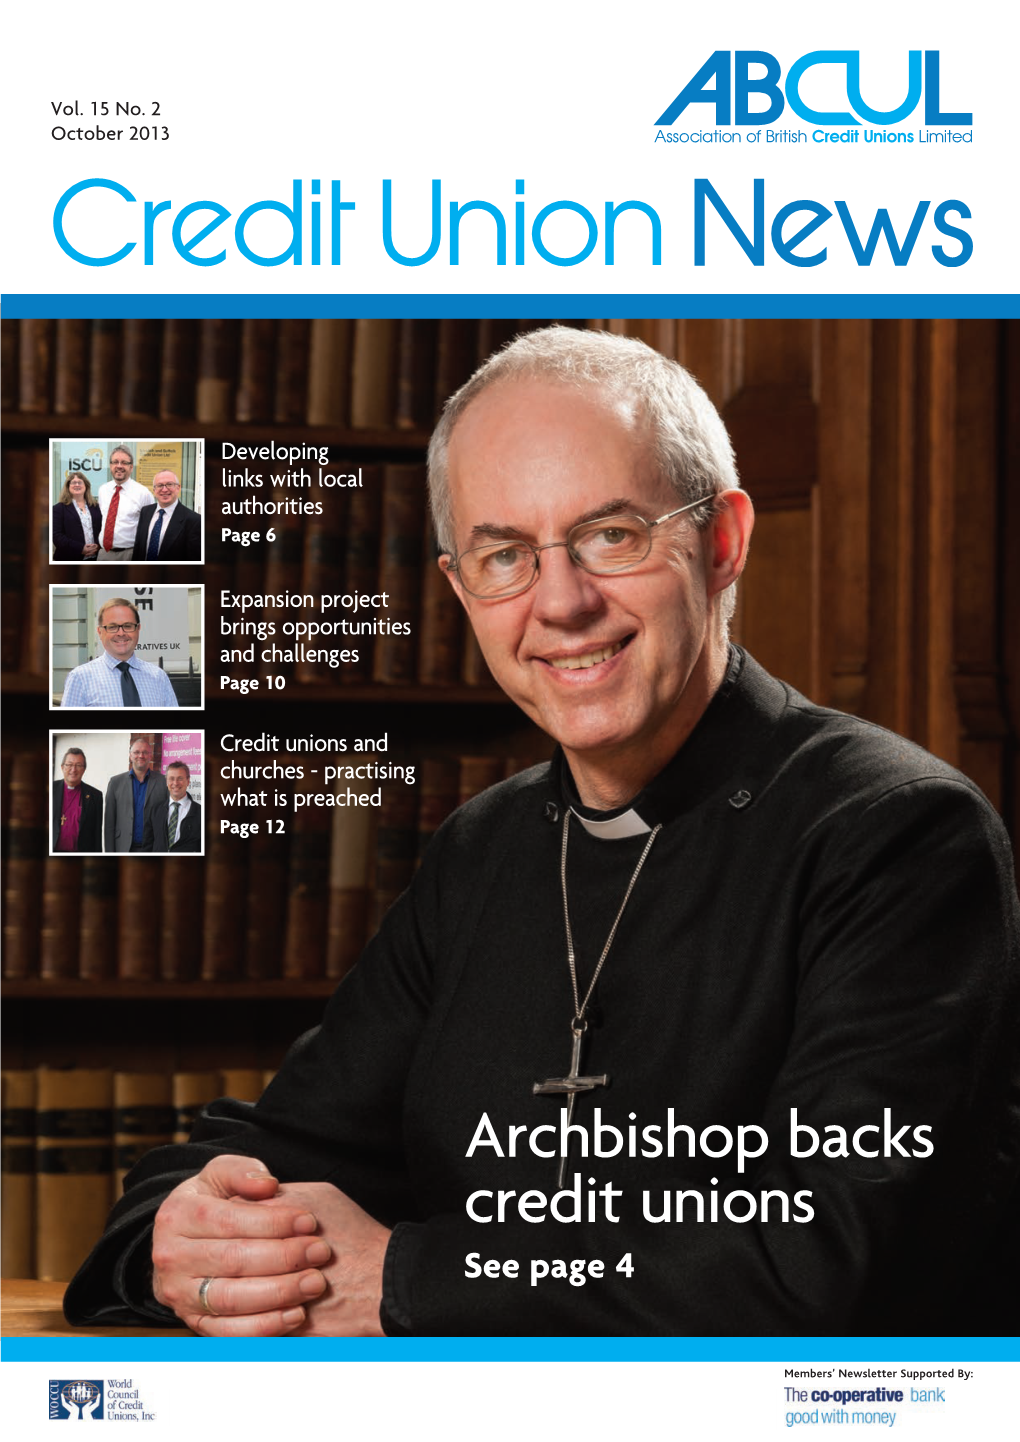 Archbishop Backs Credit Unions See Page 4